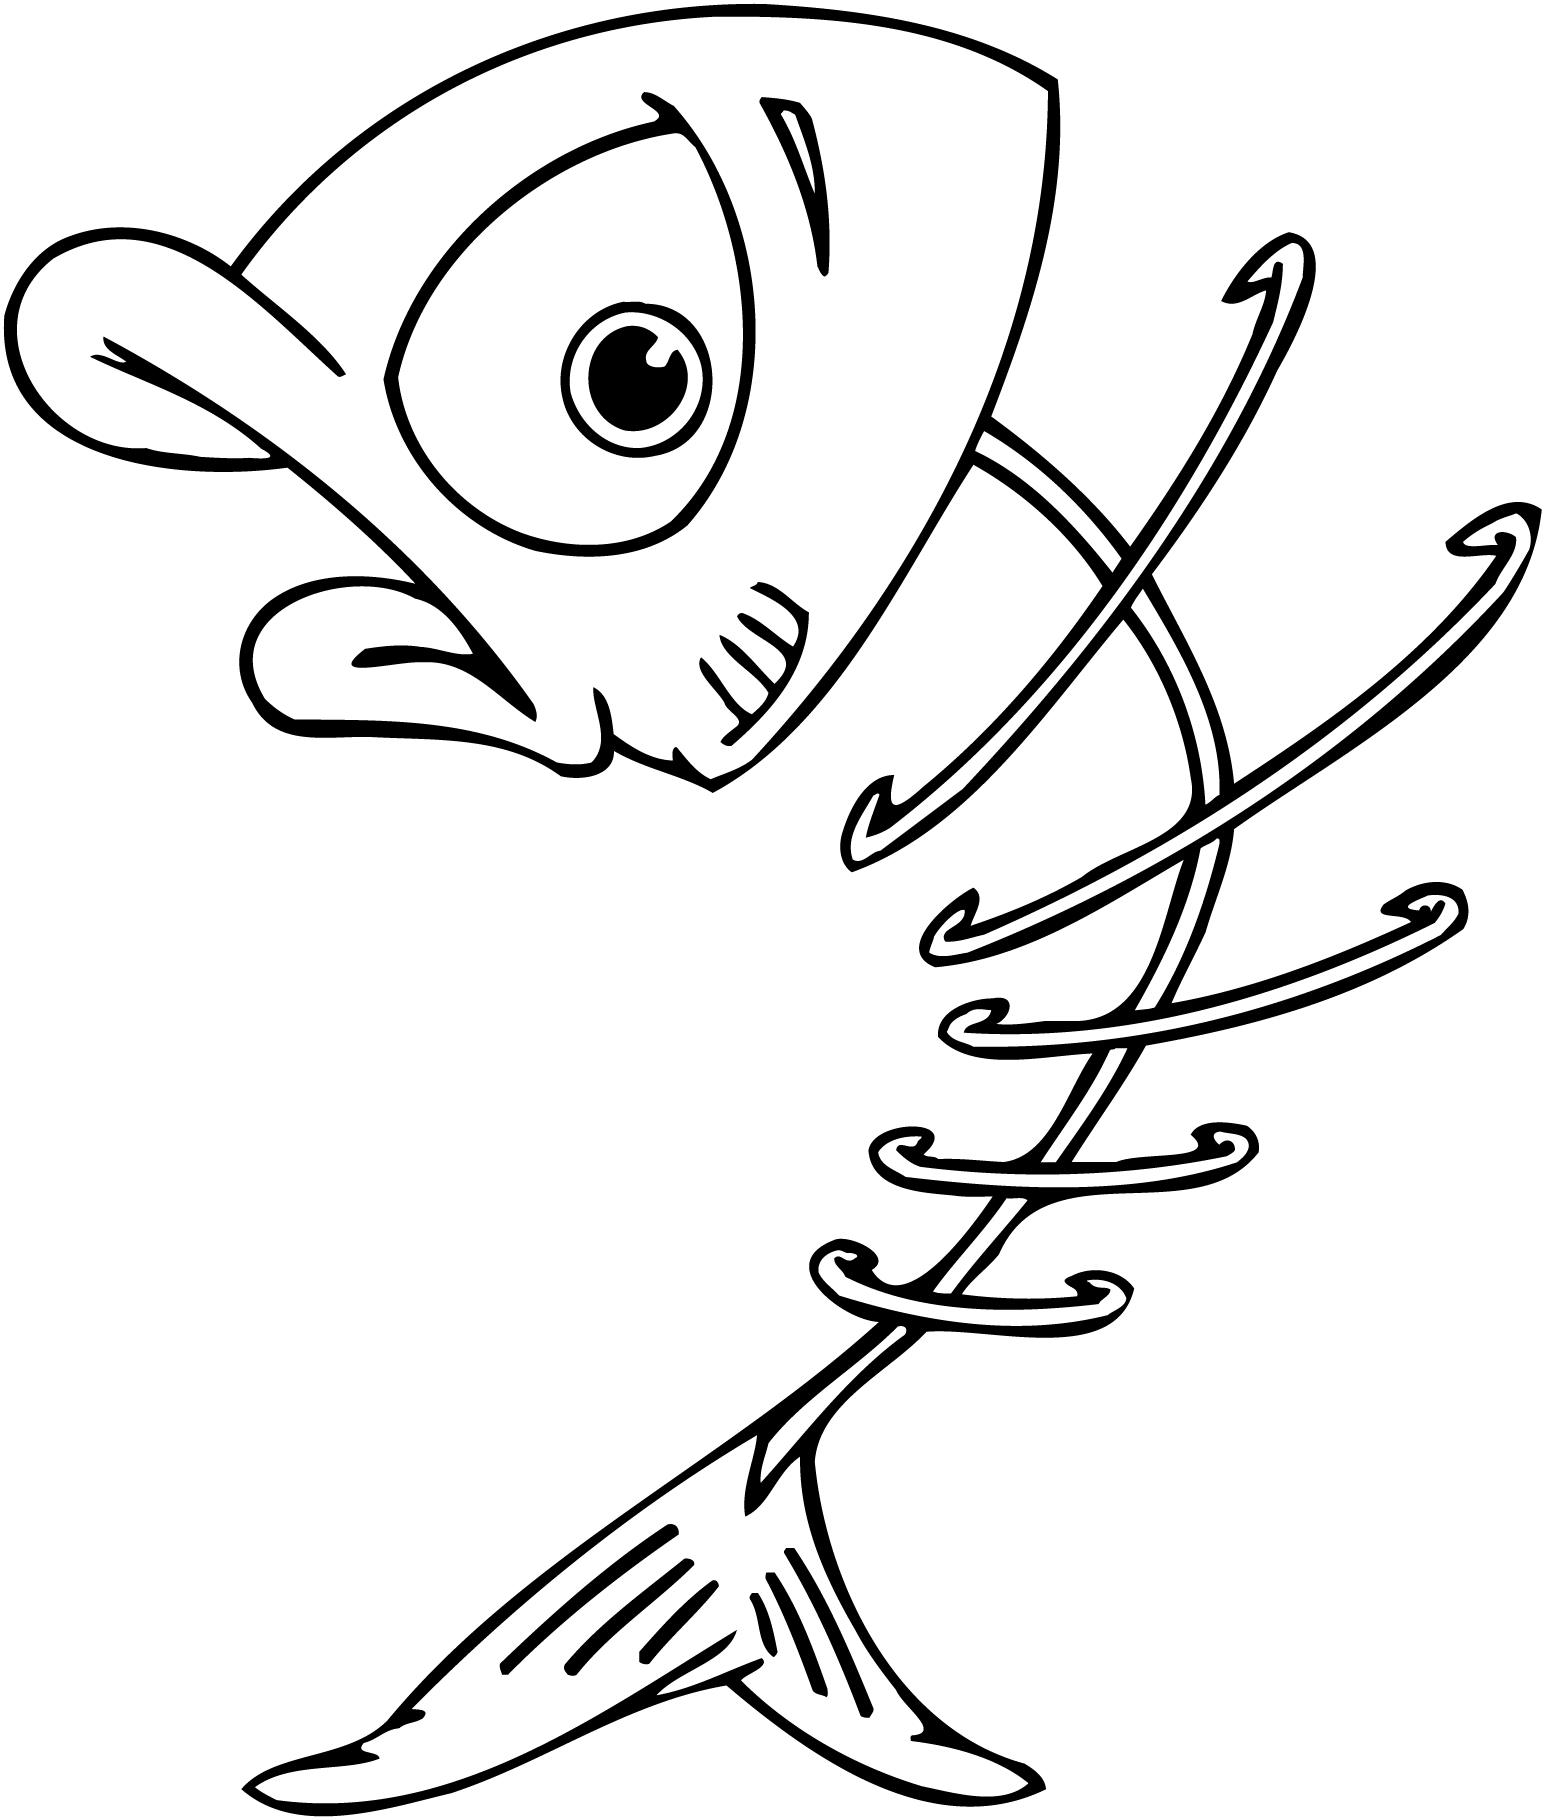 printable cartoon skeleton of a fish bones for kids - Coloring ... -  ClipArt Best - ClipArt Best